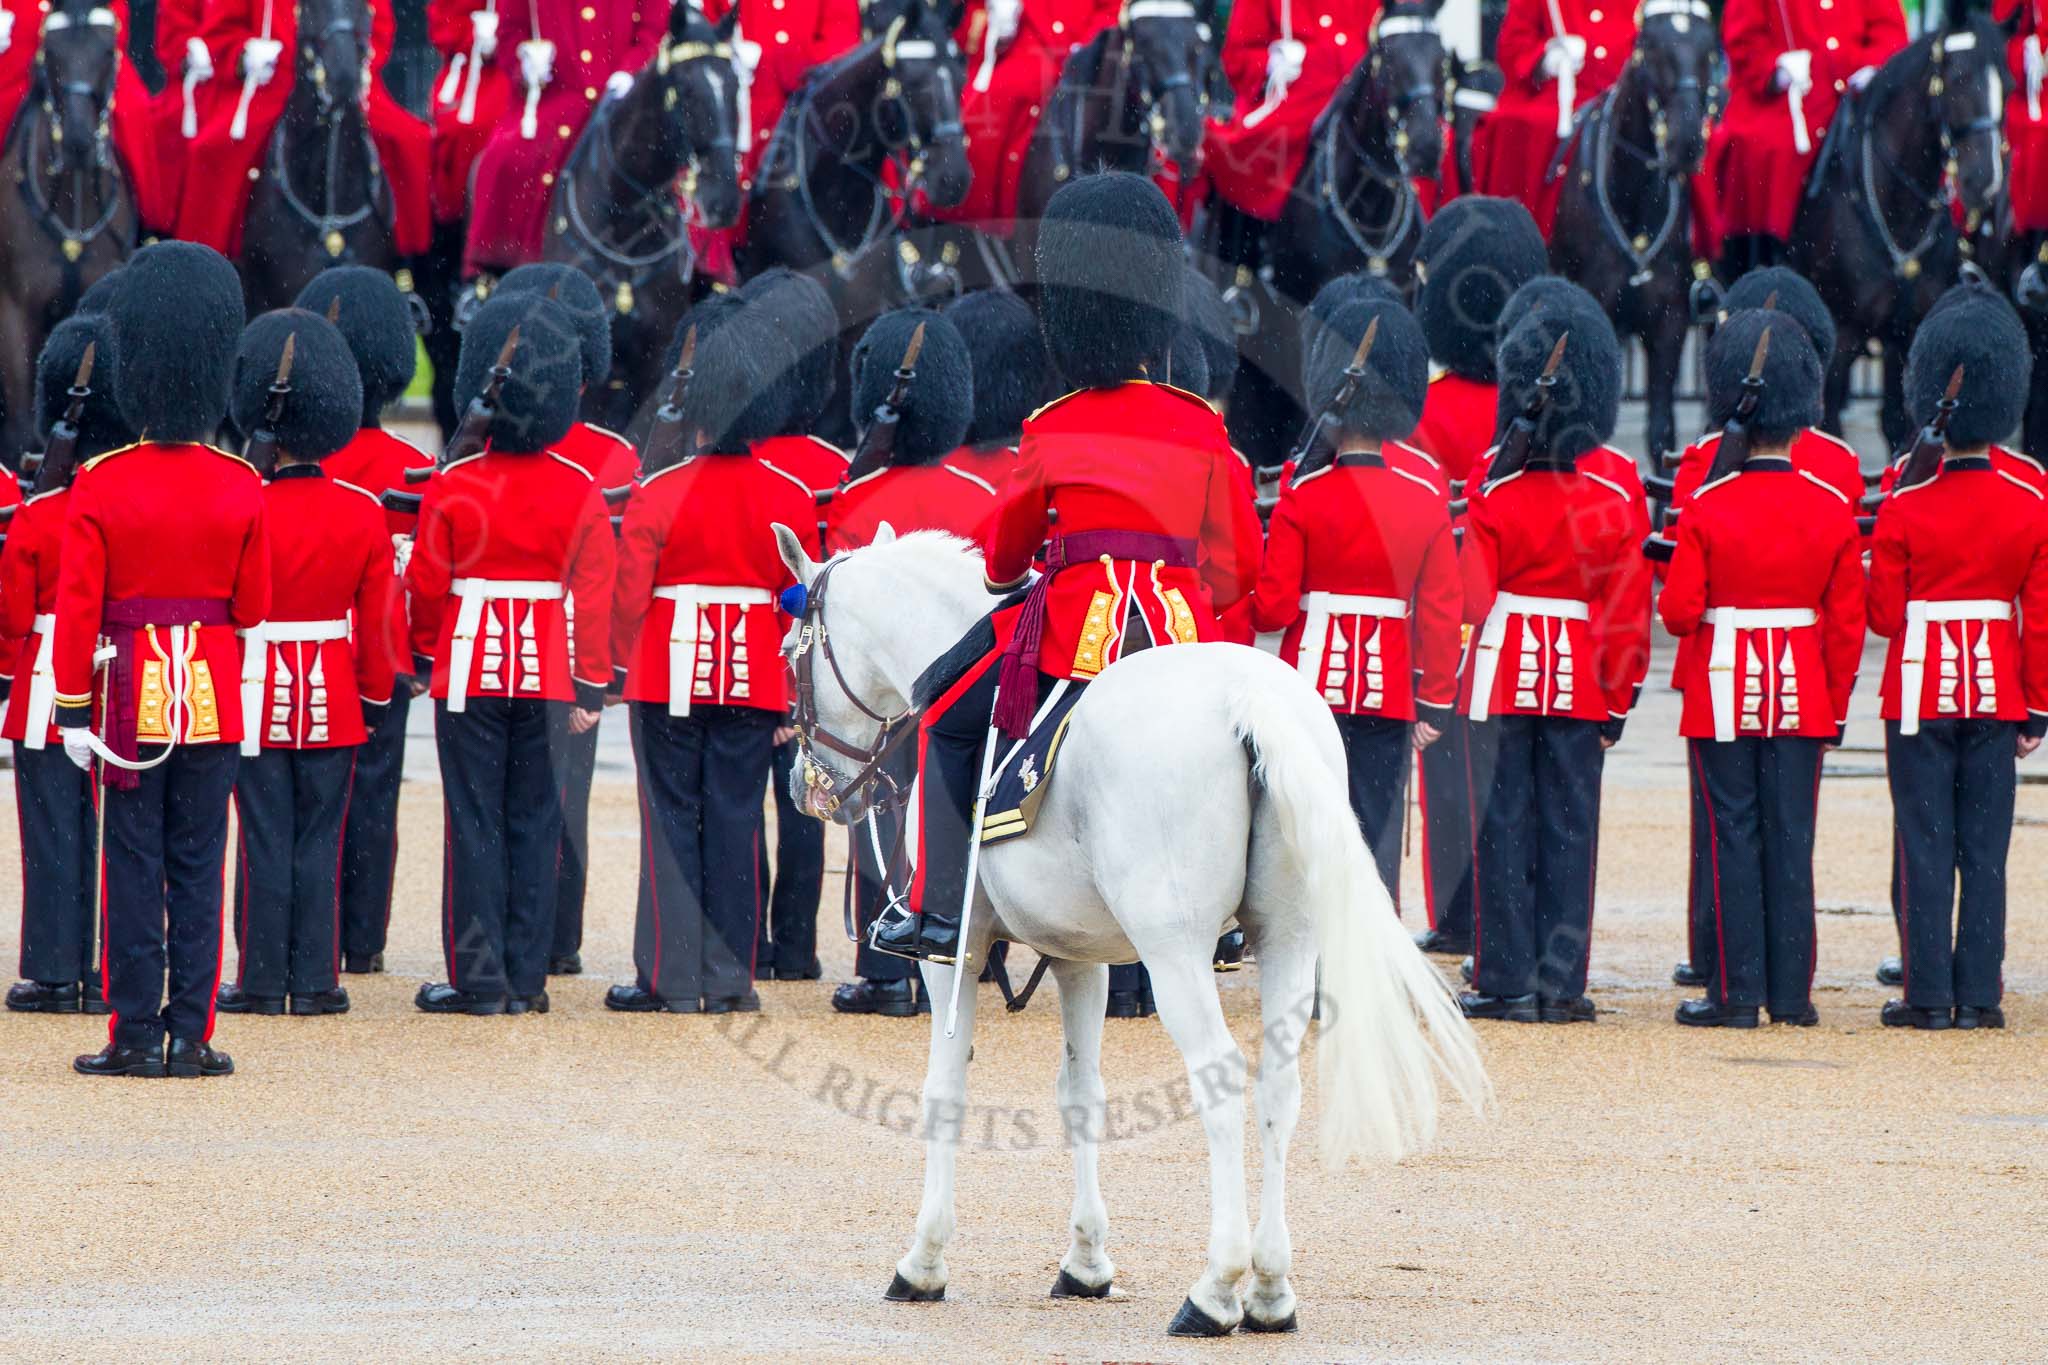 The Colonel's Review 2014.
Horse Guards Parade, Westminster,
London,

United Kingdom,
on 07 June 2014 at 11:28, image #452